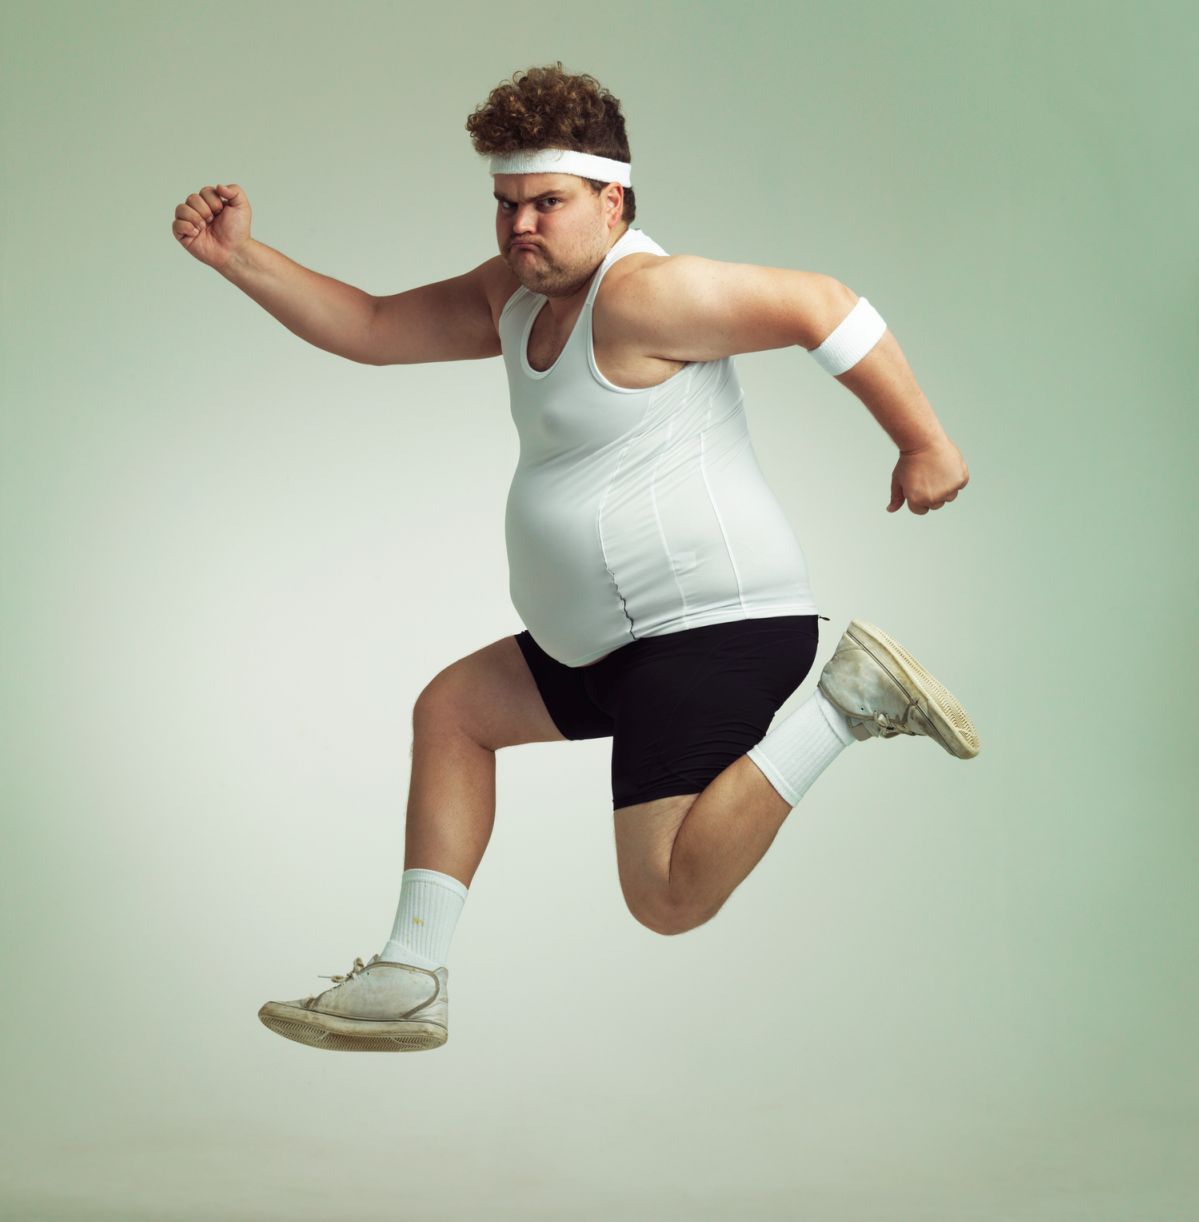 Overweight man leaping in the air with his sense of achievement. Bild: © istock.com / Yuri_Arcurs